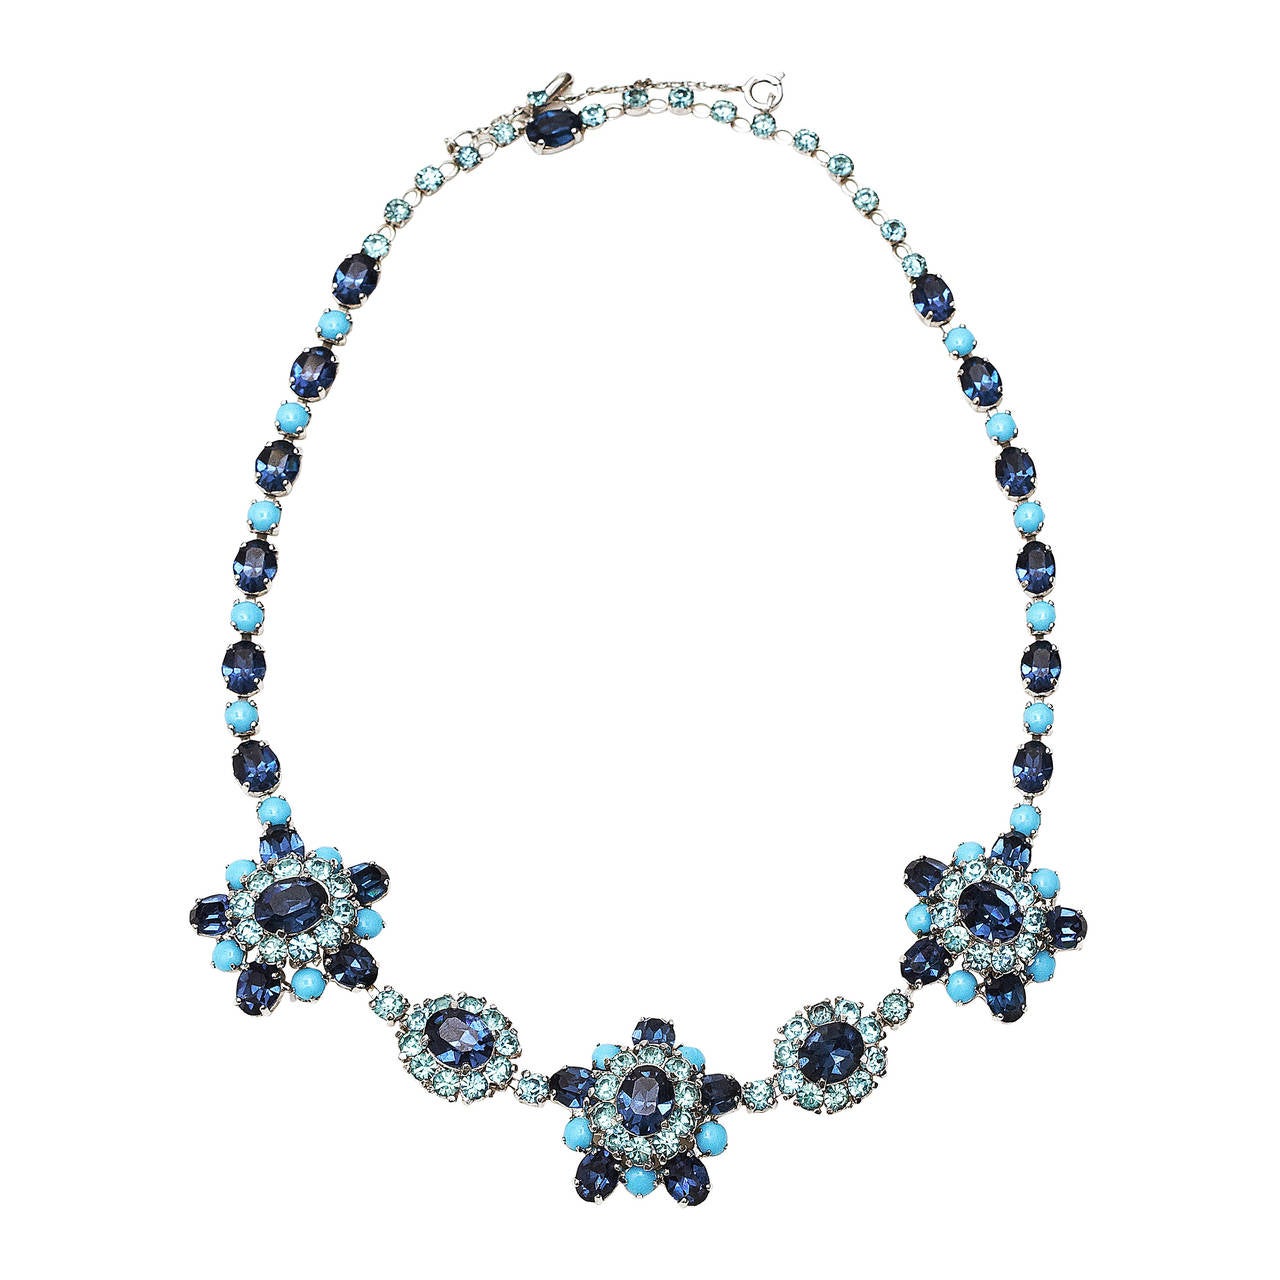 1950s Christian Dior Mitchel Maer Turquoise Blue Necklace For Sale